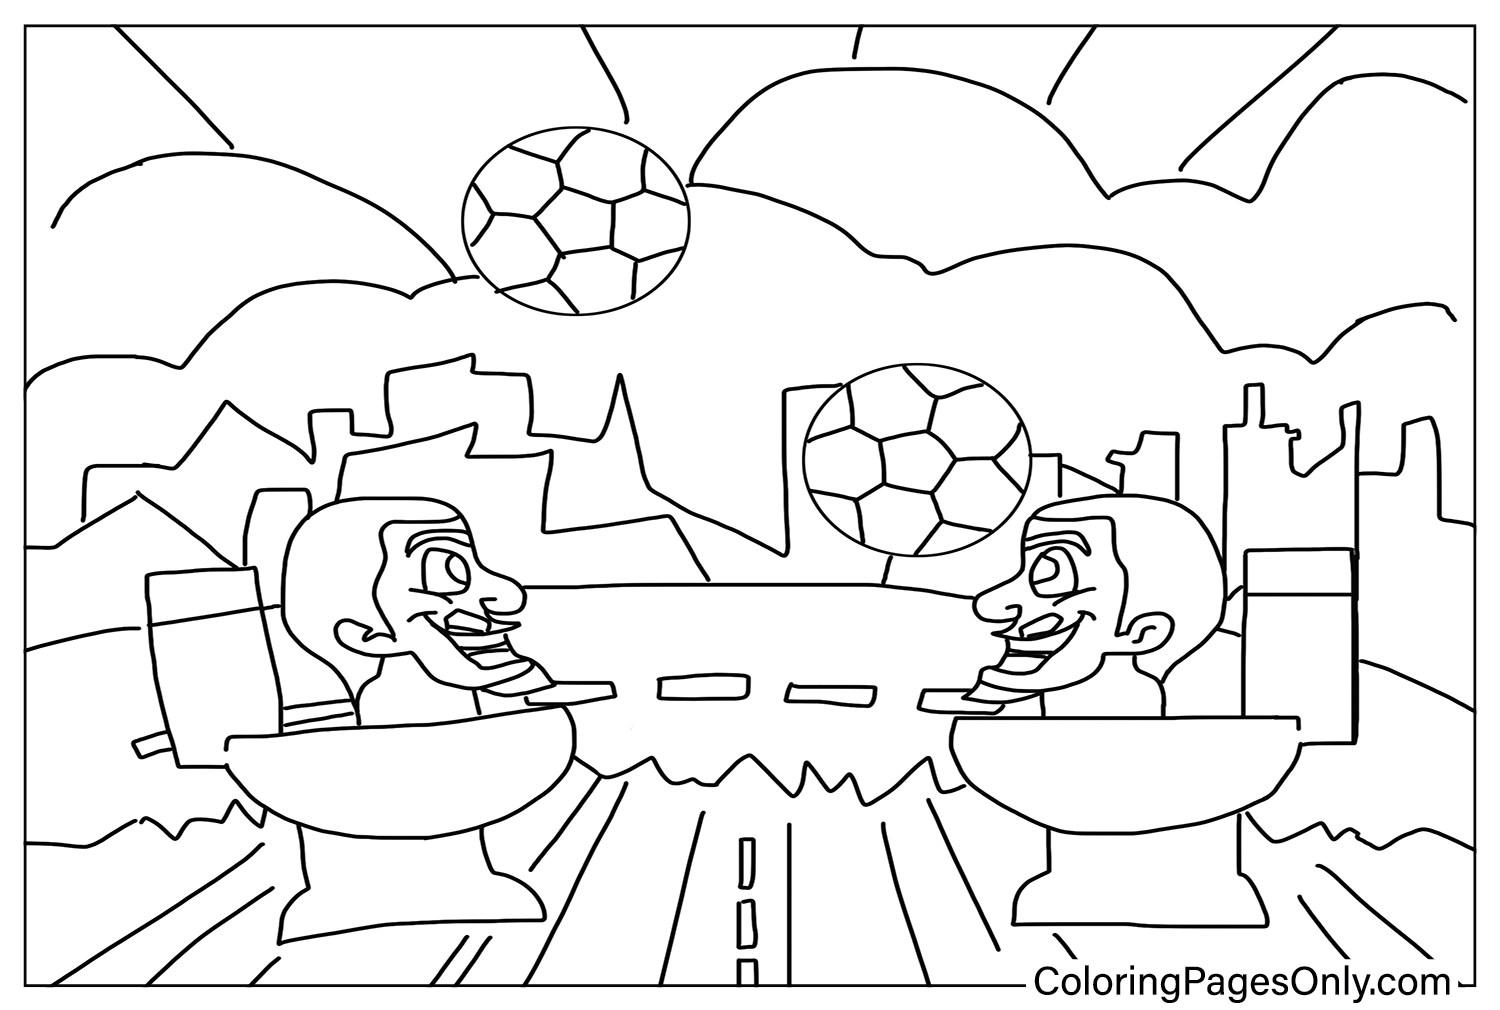 Skibidi Toilet Soccer Coloring Pages from Skibidi Toilet